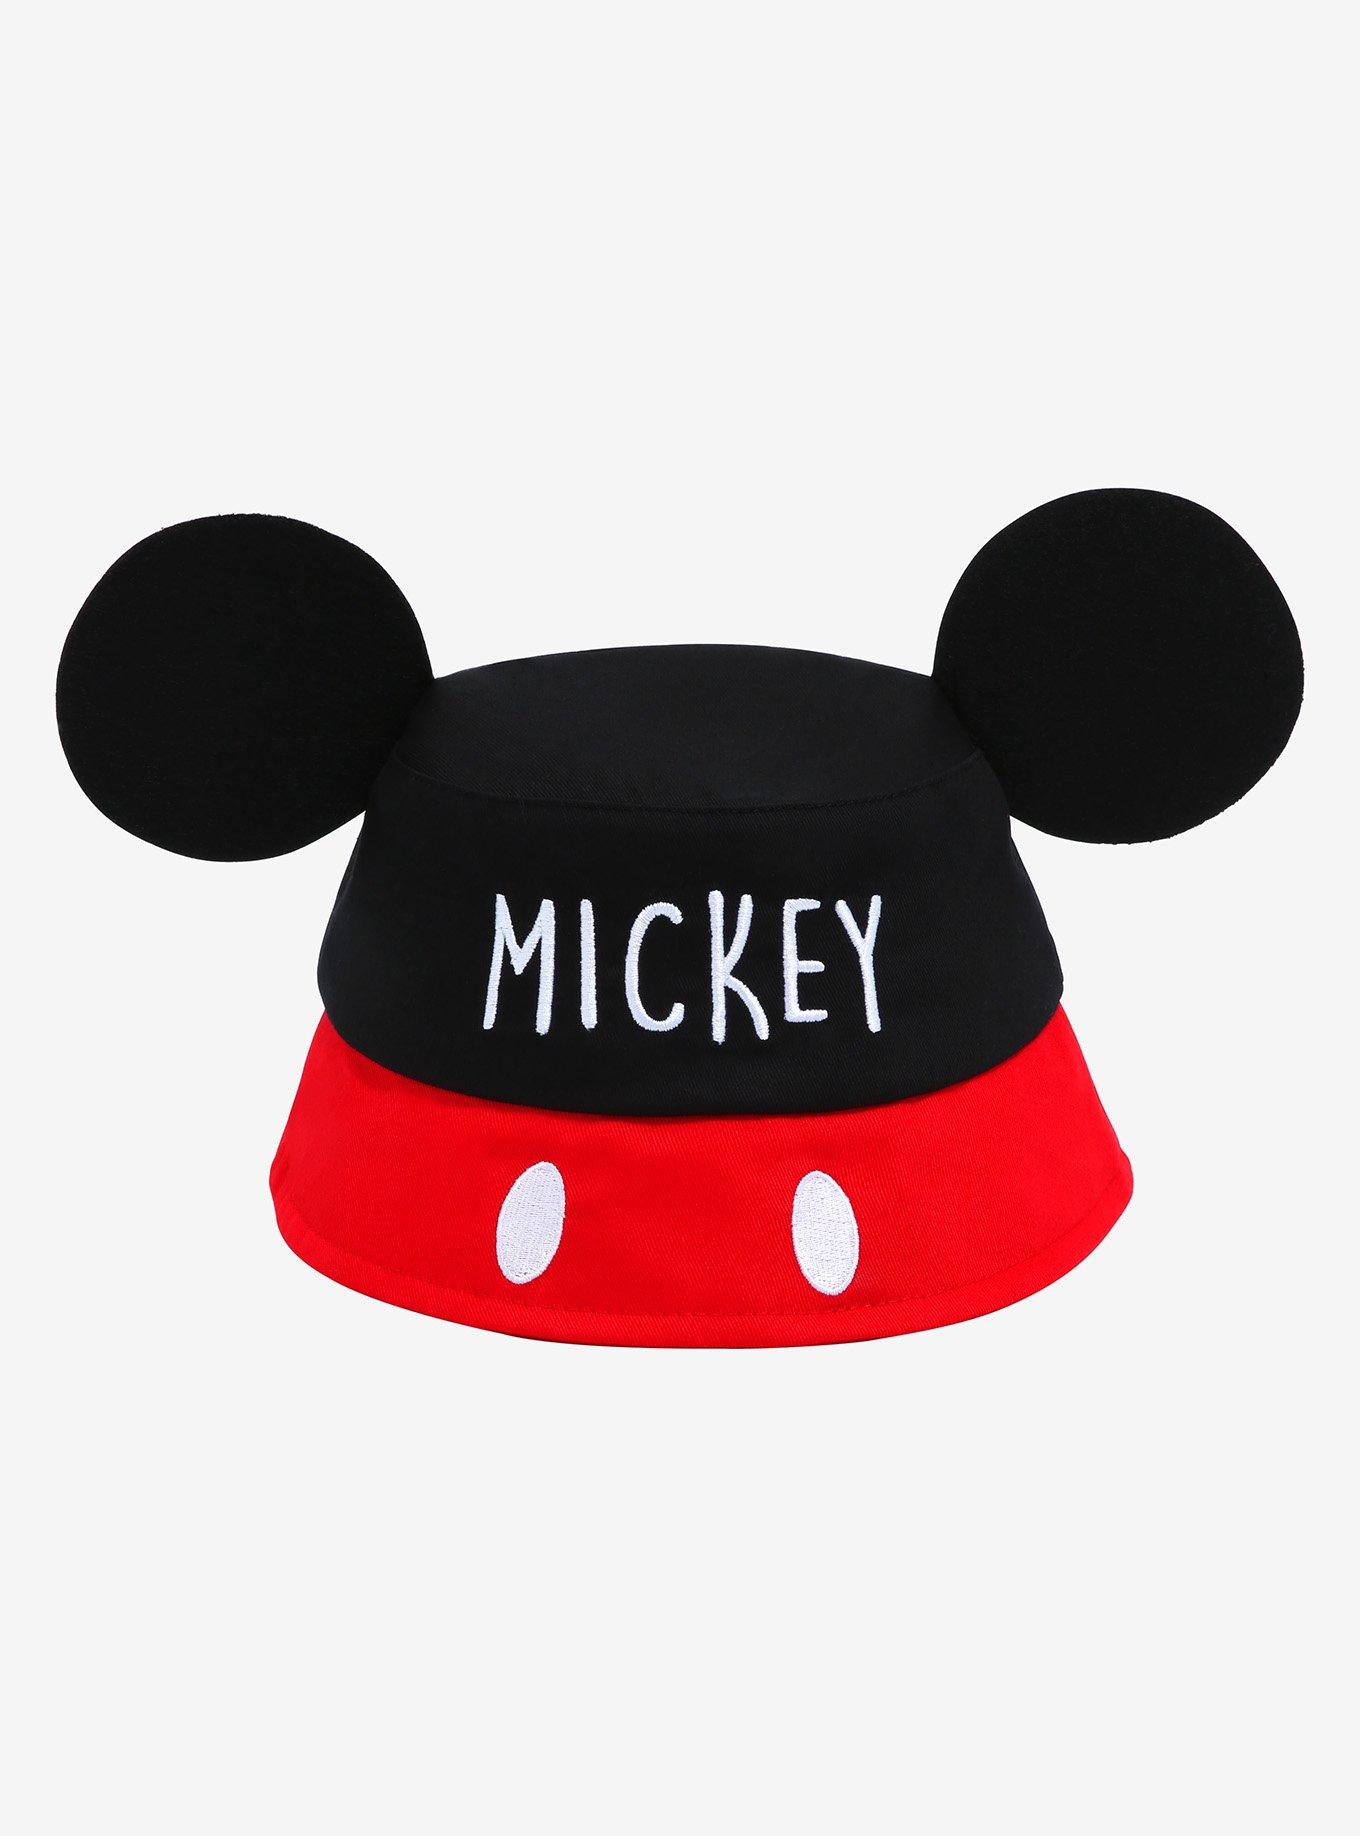 DISNEY Really Cute Little MICKEY MOUSE Bucket Hat NWT 